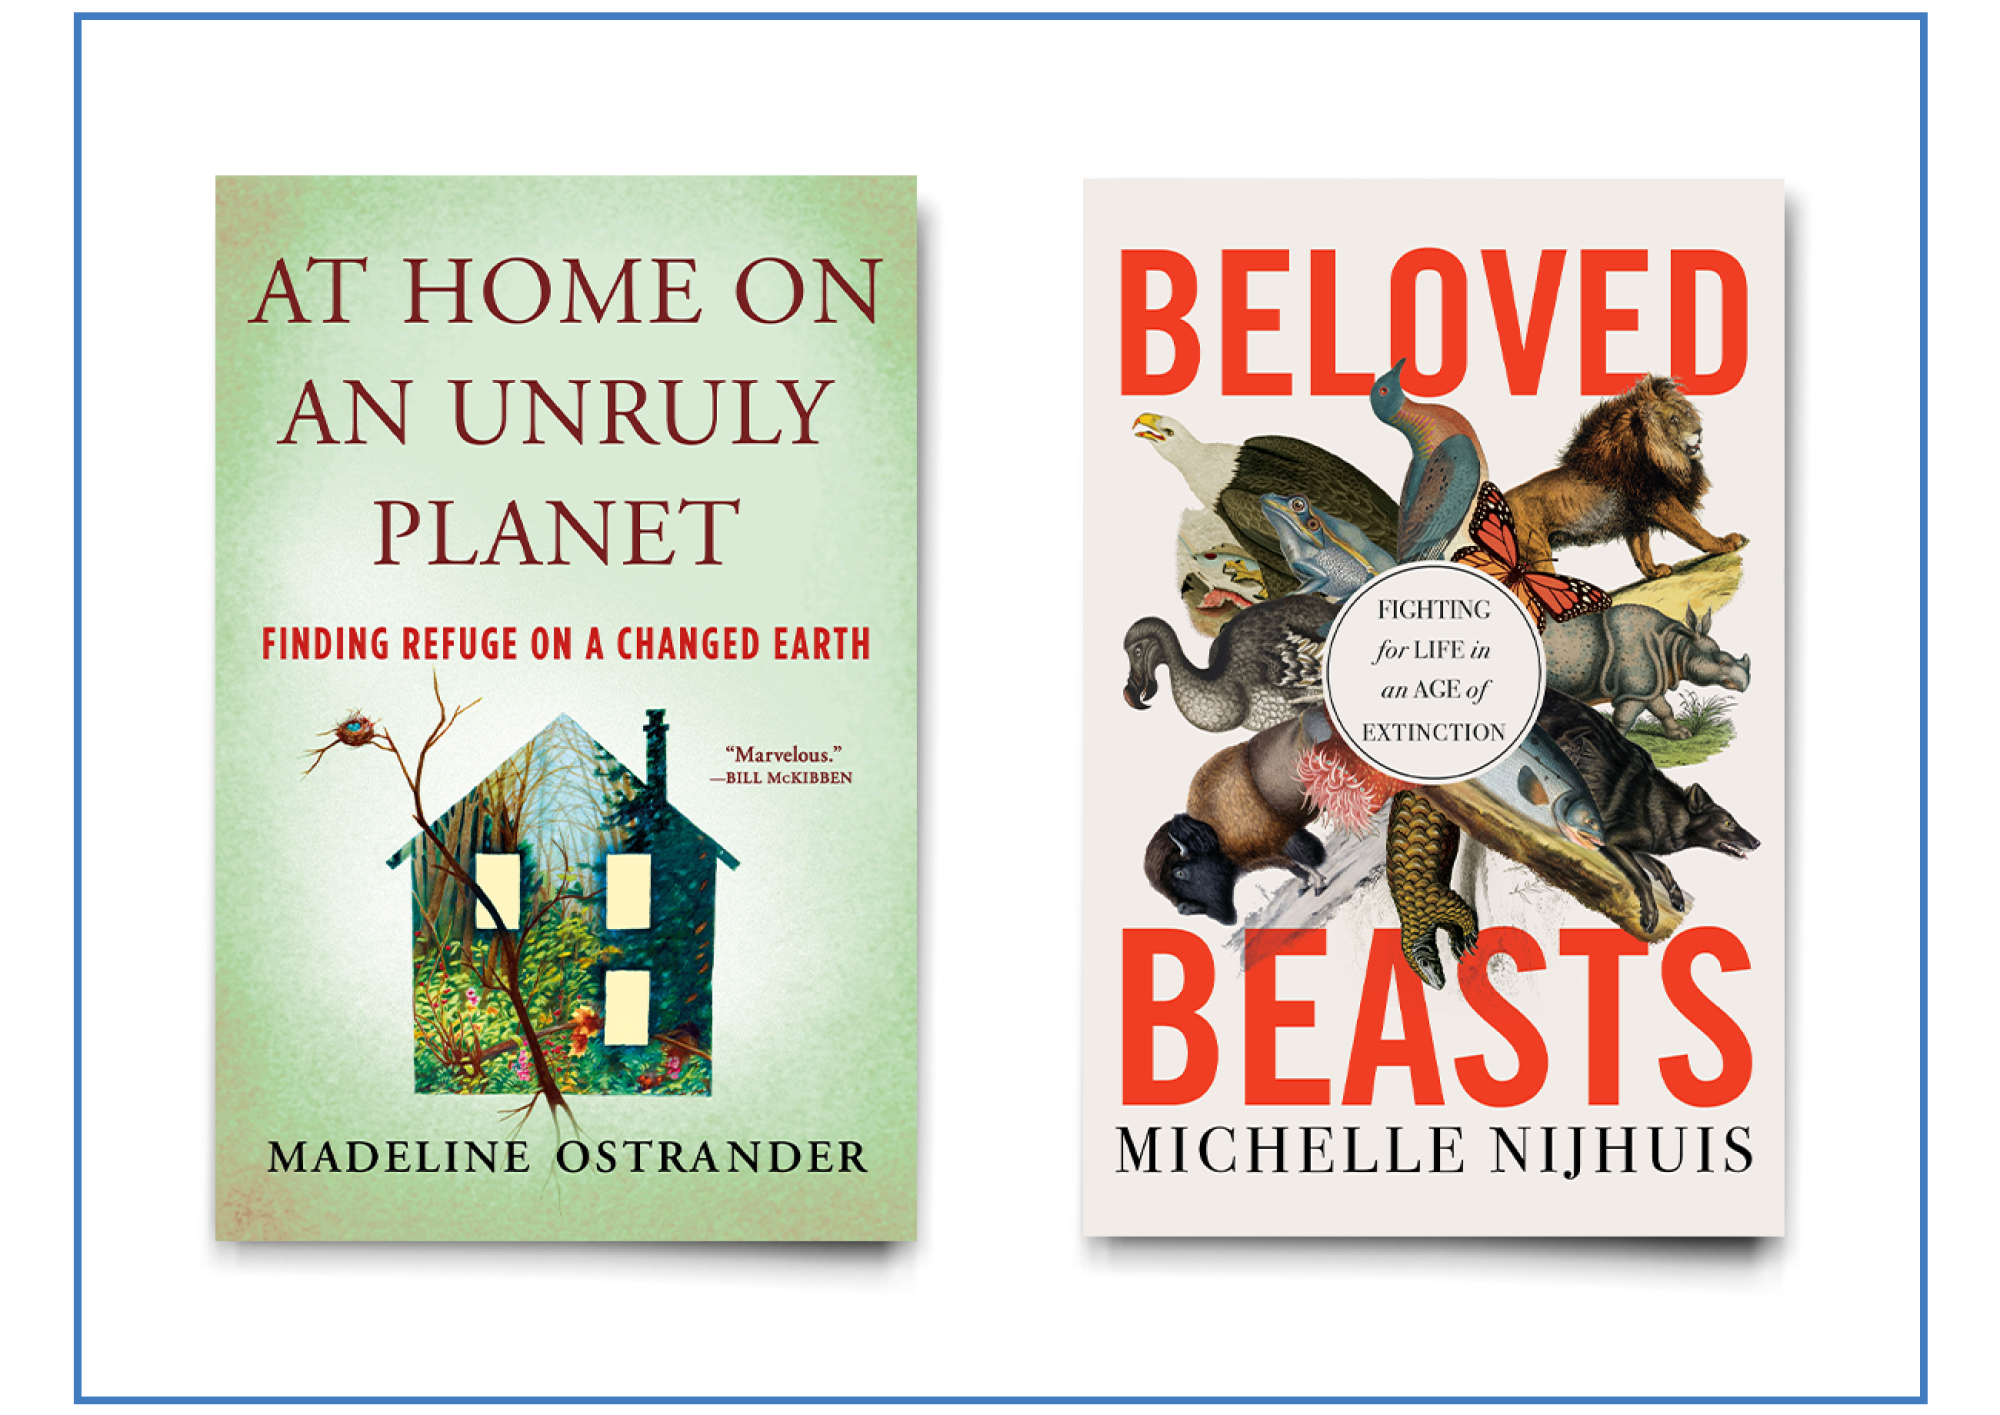 Book covers: "At Home on An Unruly Planet: Finding Refuge on a Changed Earth" and "Beloved Beasts"